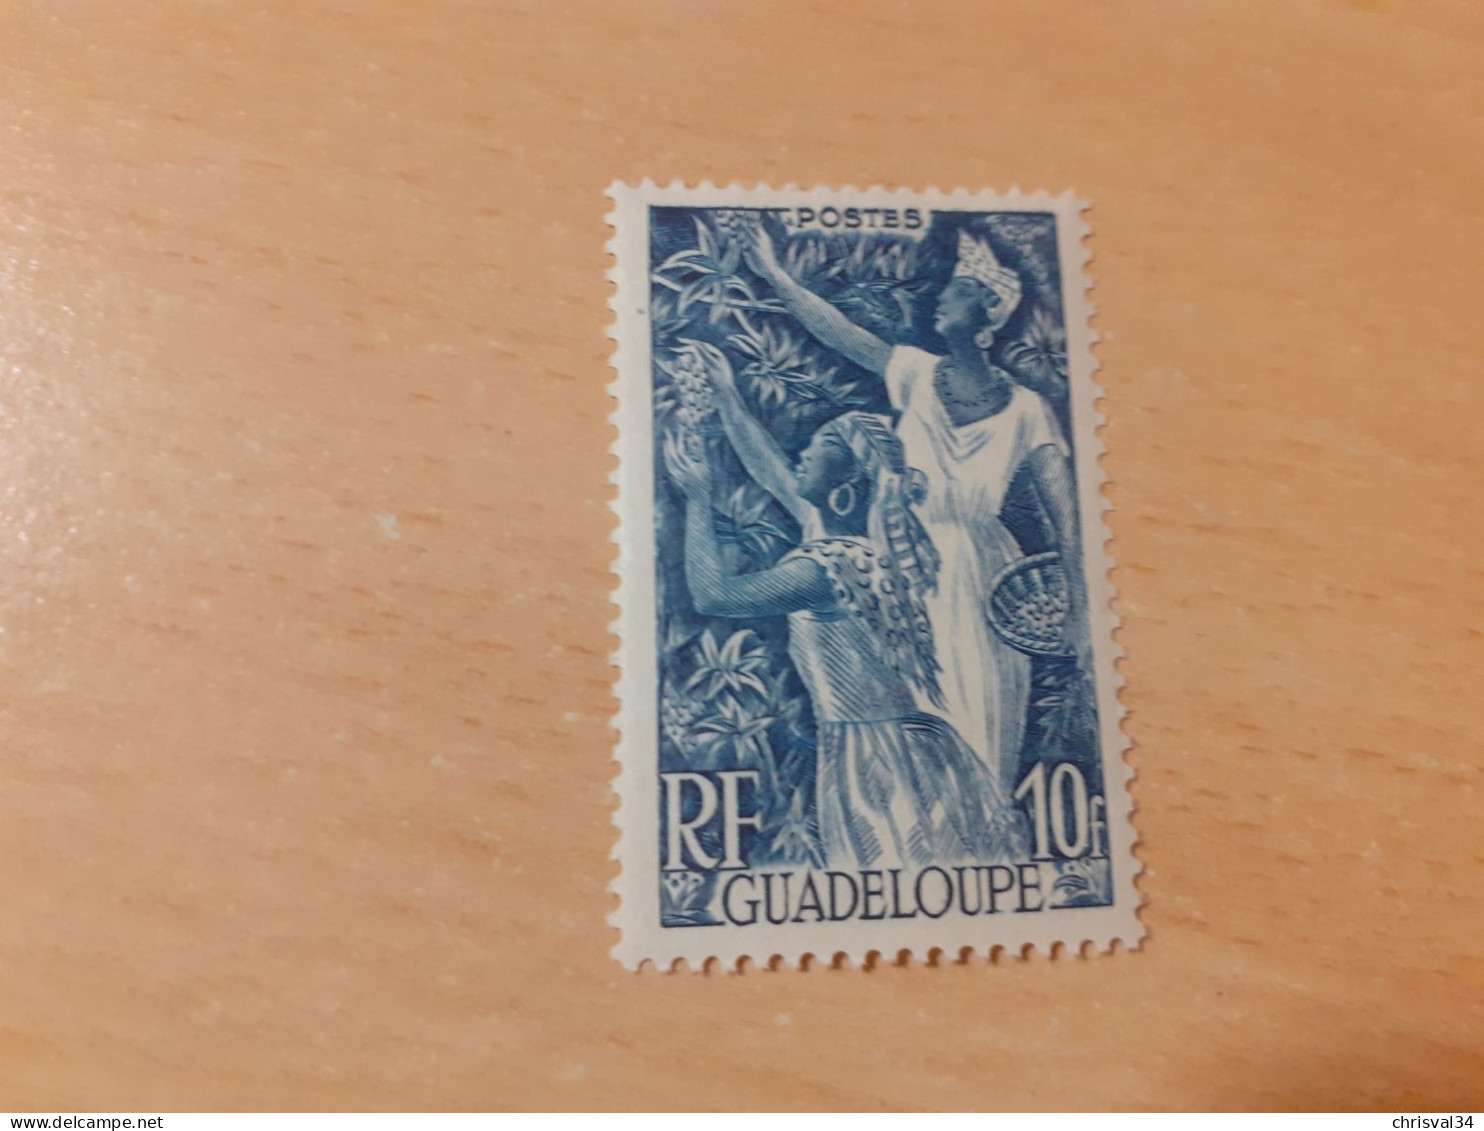 TIMBRE   GUADELOUPE       N  209    COTE  1,25   EUROS  NEUF  TRACE  CHARNIERE - Ongebruikt